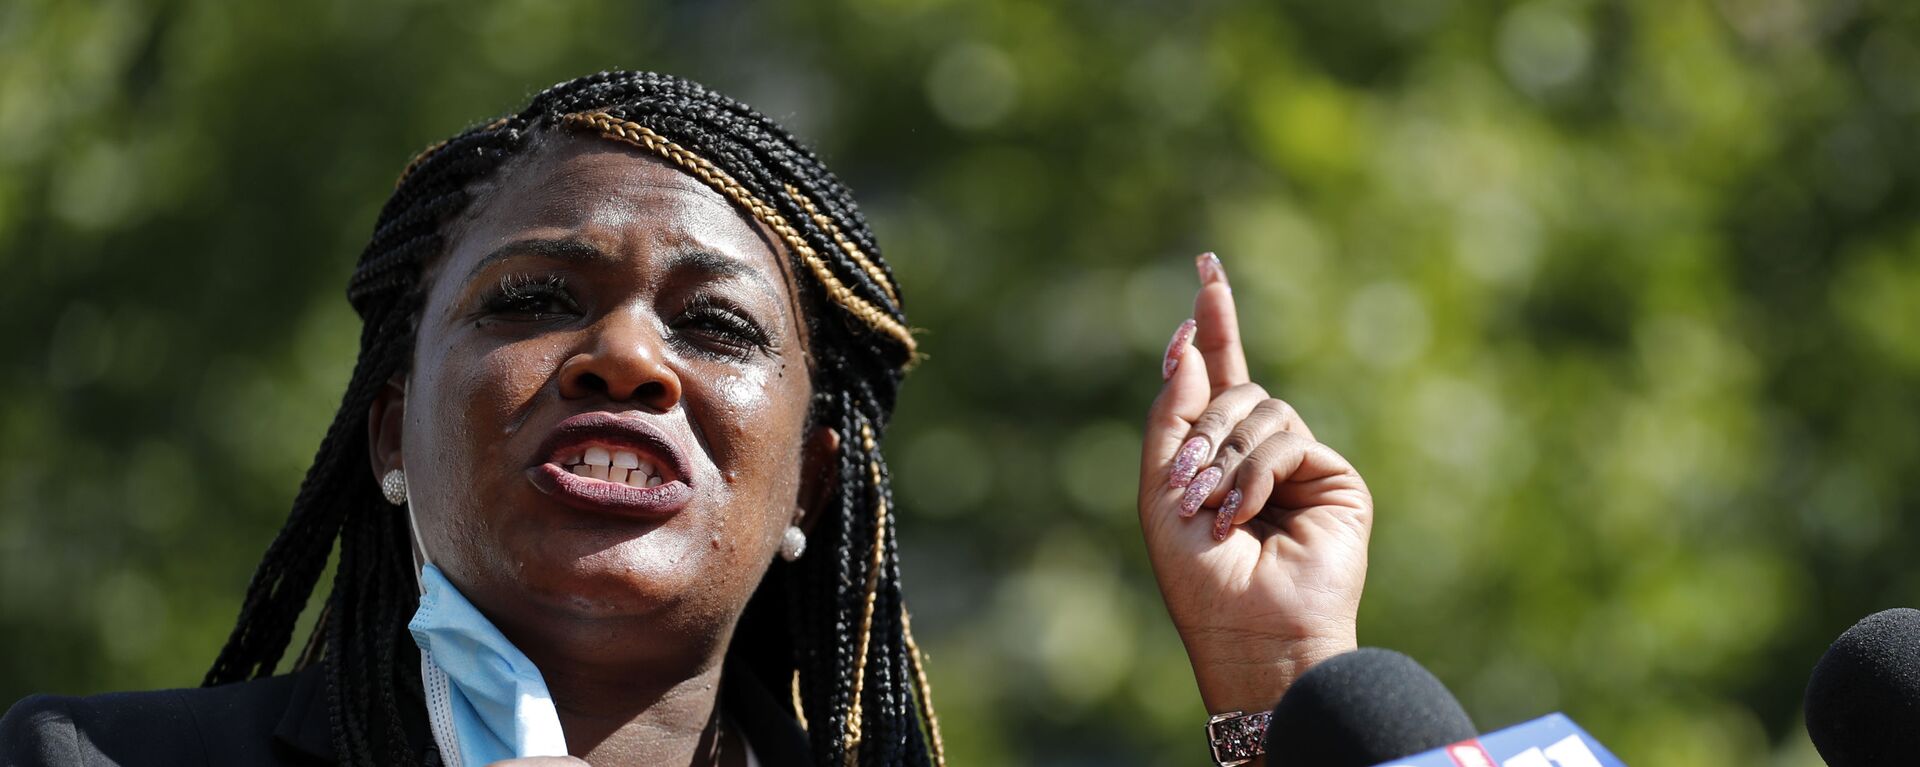 In this Aug. 5, 2020, file photo, Activist Cori Bush speaks during a news conference Wednesday, Aug. 5, 2020, in St. Louis - Sputnik International, 1920, 14.09.2021